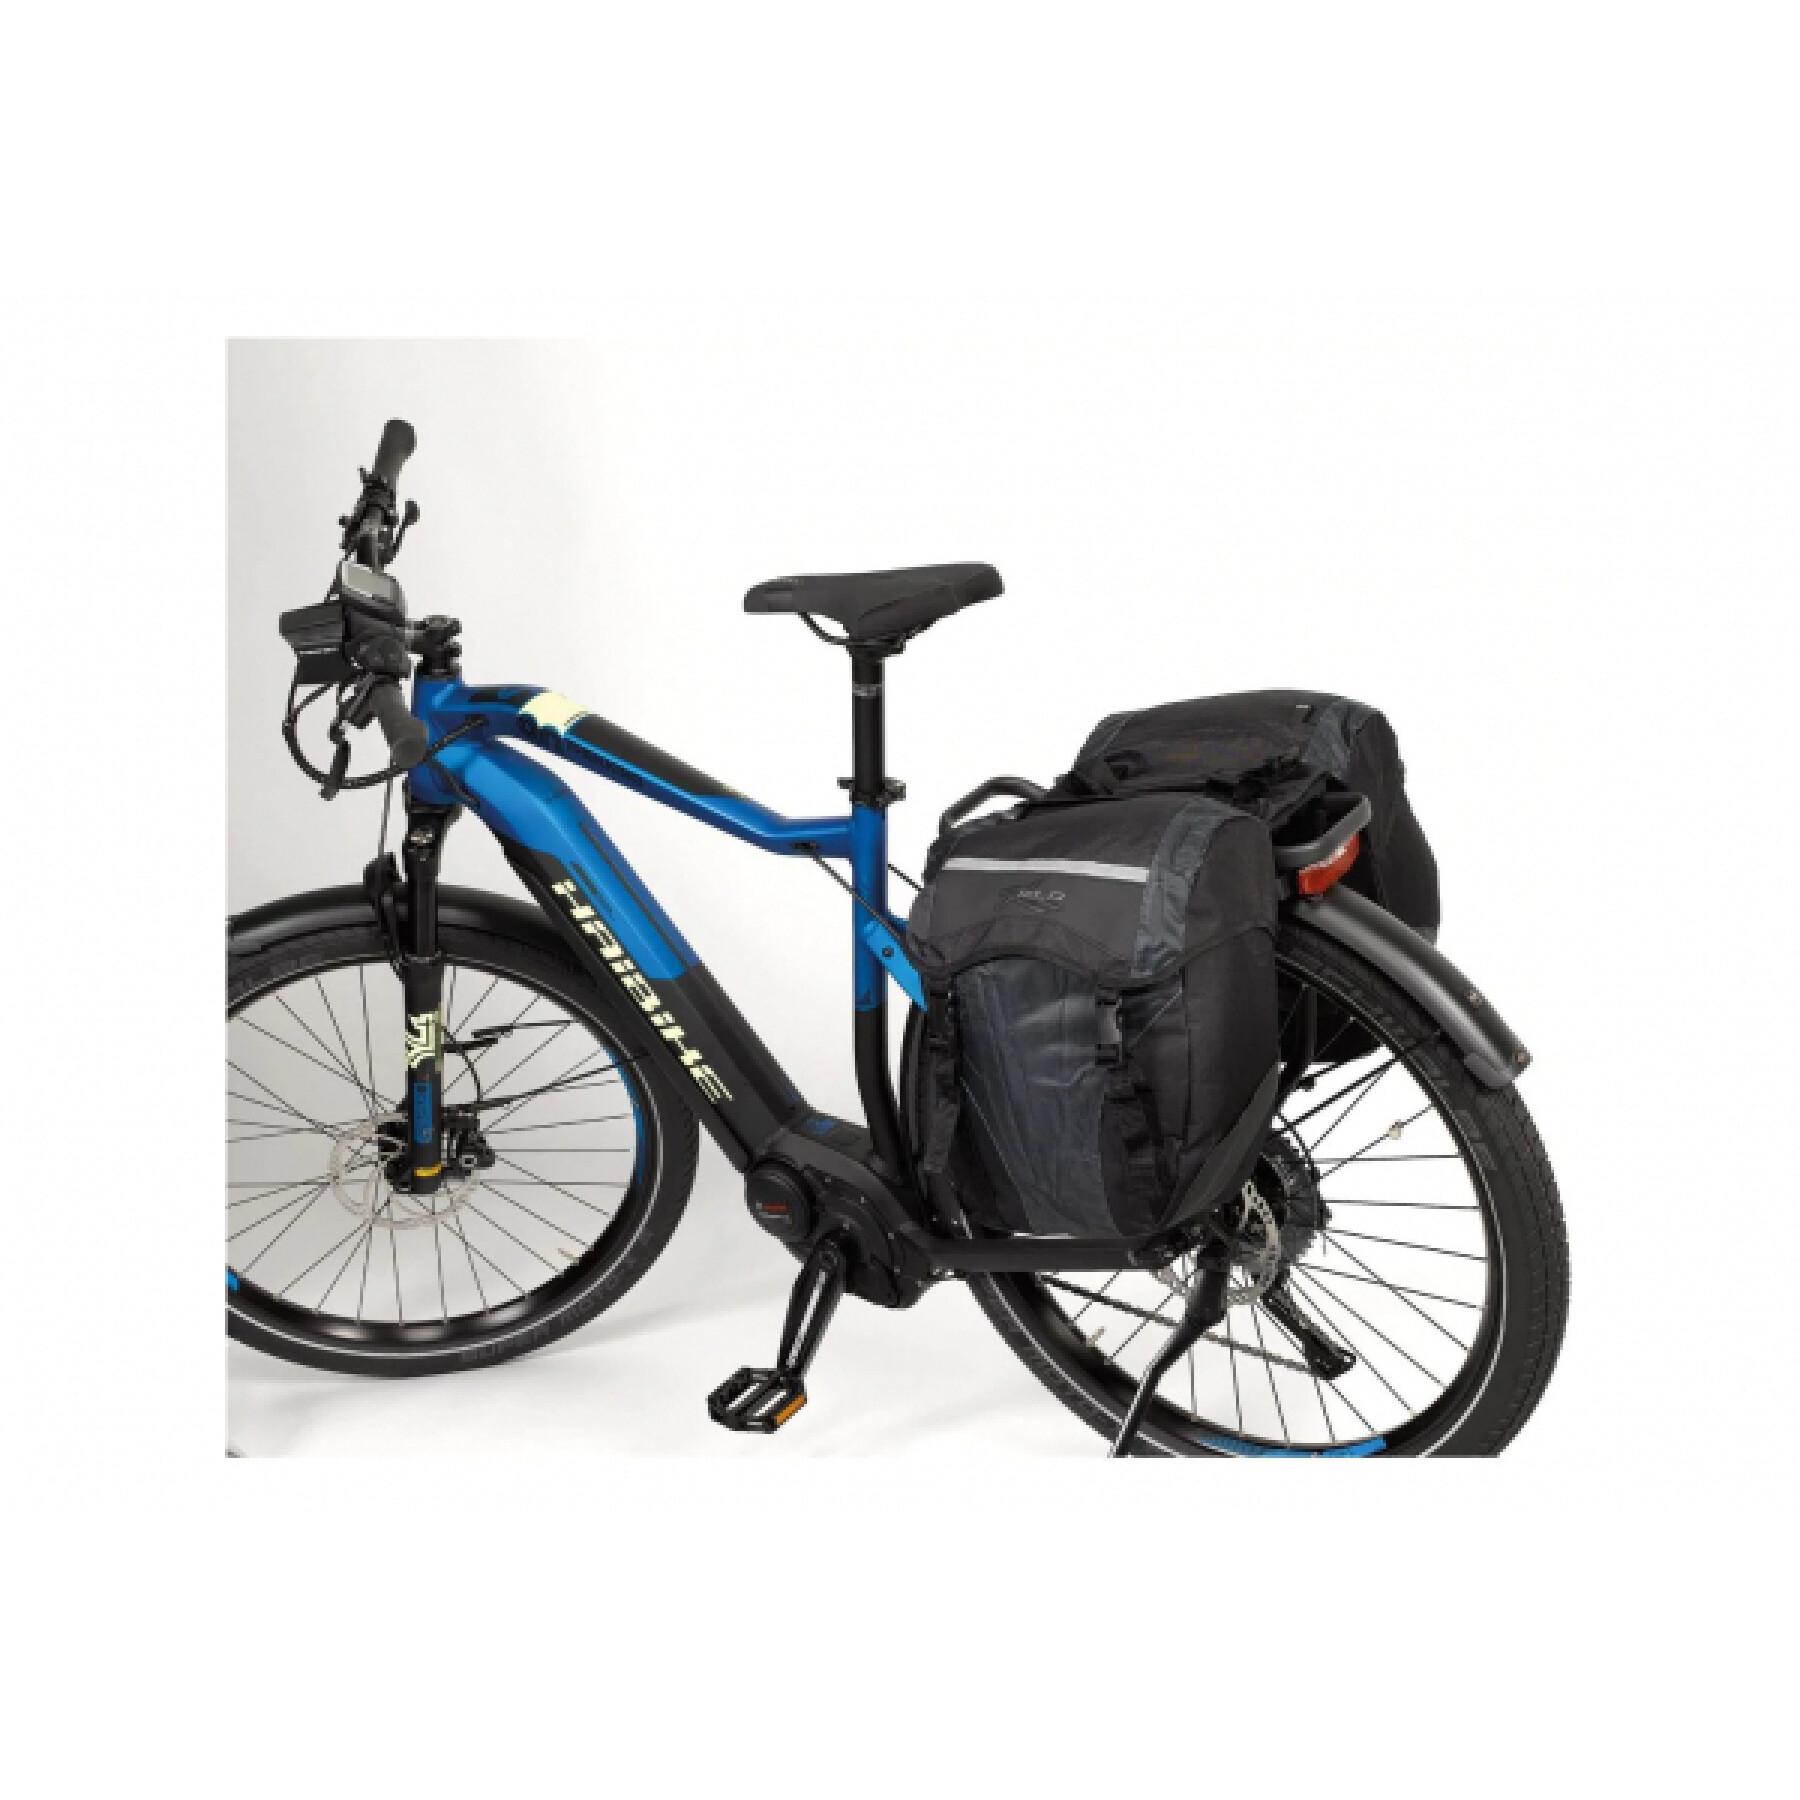 Carrier bag for bicycle carrier transport plus XLC Ba-s63